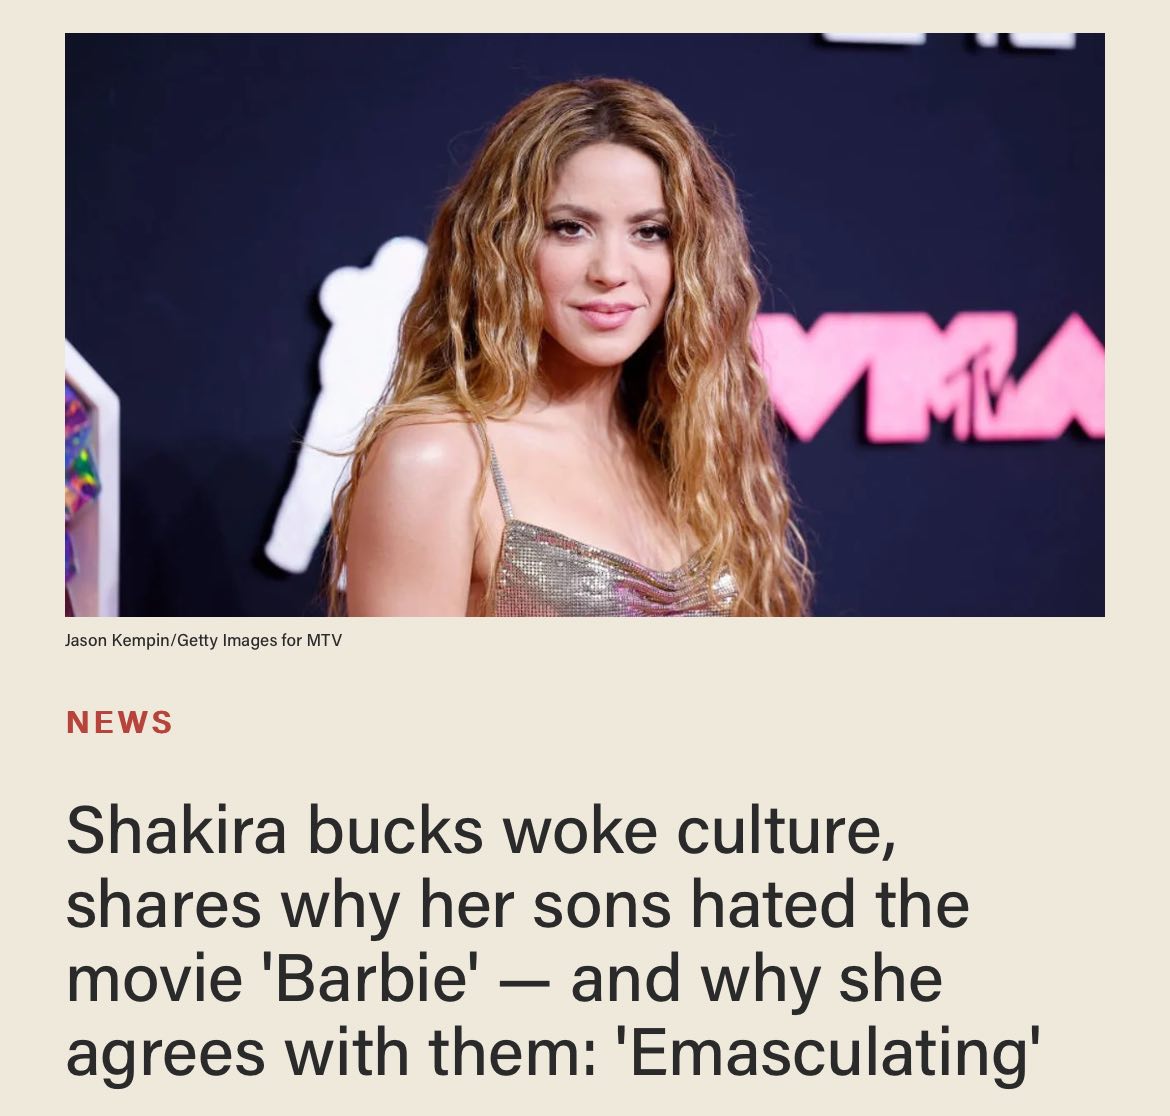 Do you agree with Shakira? 👀 'I'm raising two boys. I want 'em to feel powerful too while respecting women,' she explained. 'I like pop culture when it attempts to empower women without robbing men of their possibility to be men, to also protect and provide. I believe in giving…